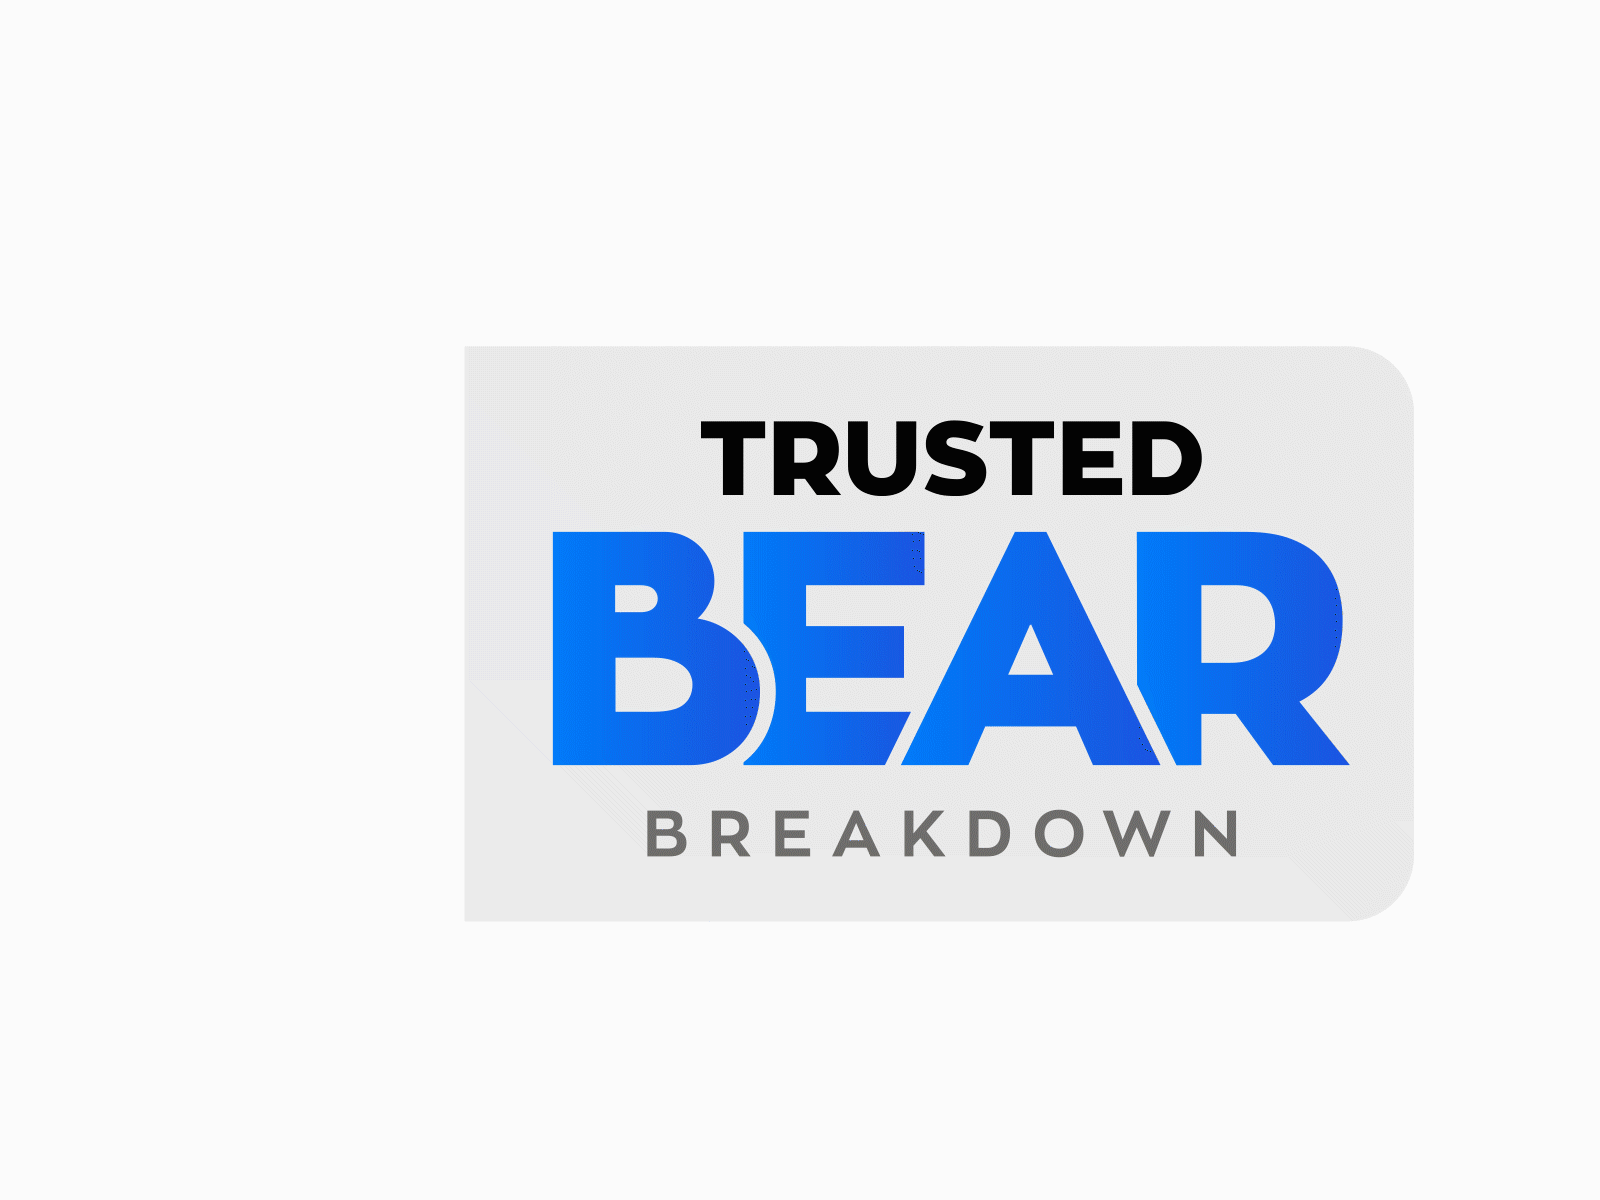 Trusted Bear BreakDown adobe aftereffects animated gif animated icons animation bear illustration logo logo animation motion graphics trusted bear breakdown ui animation